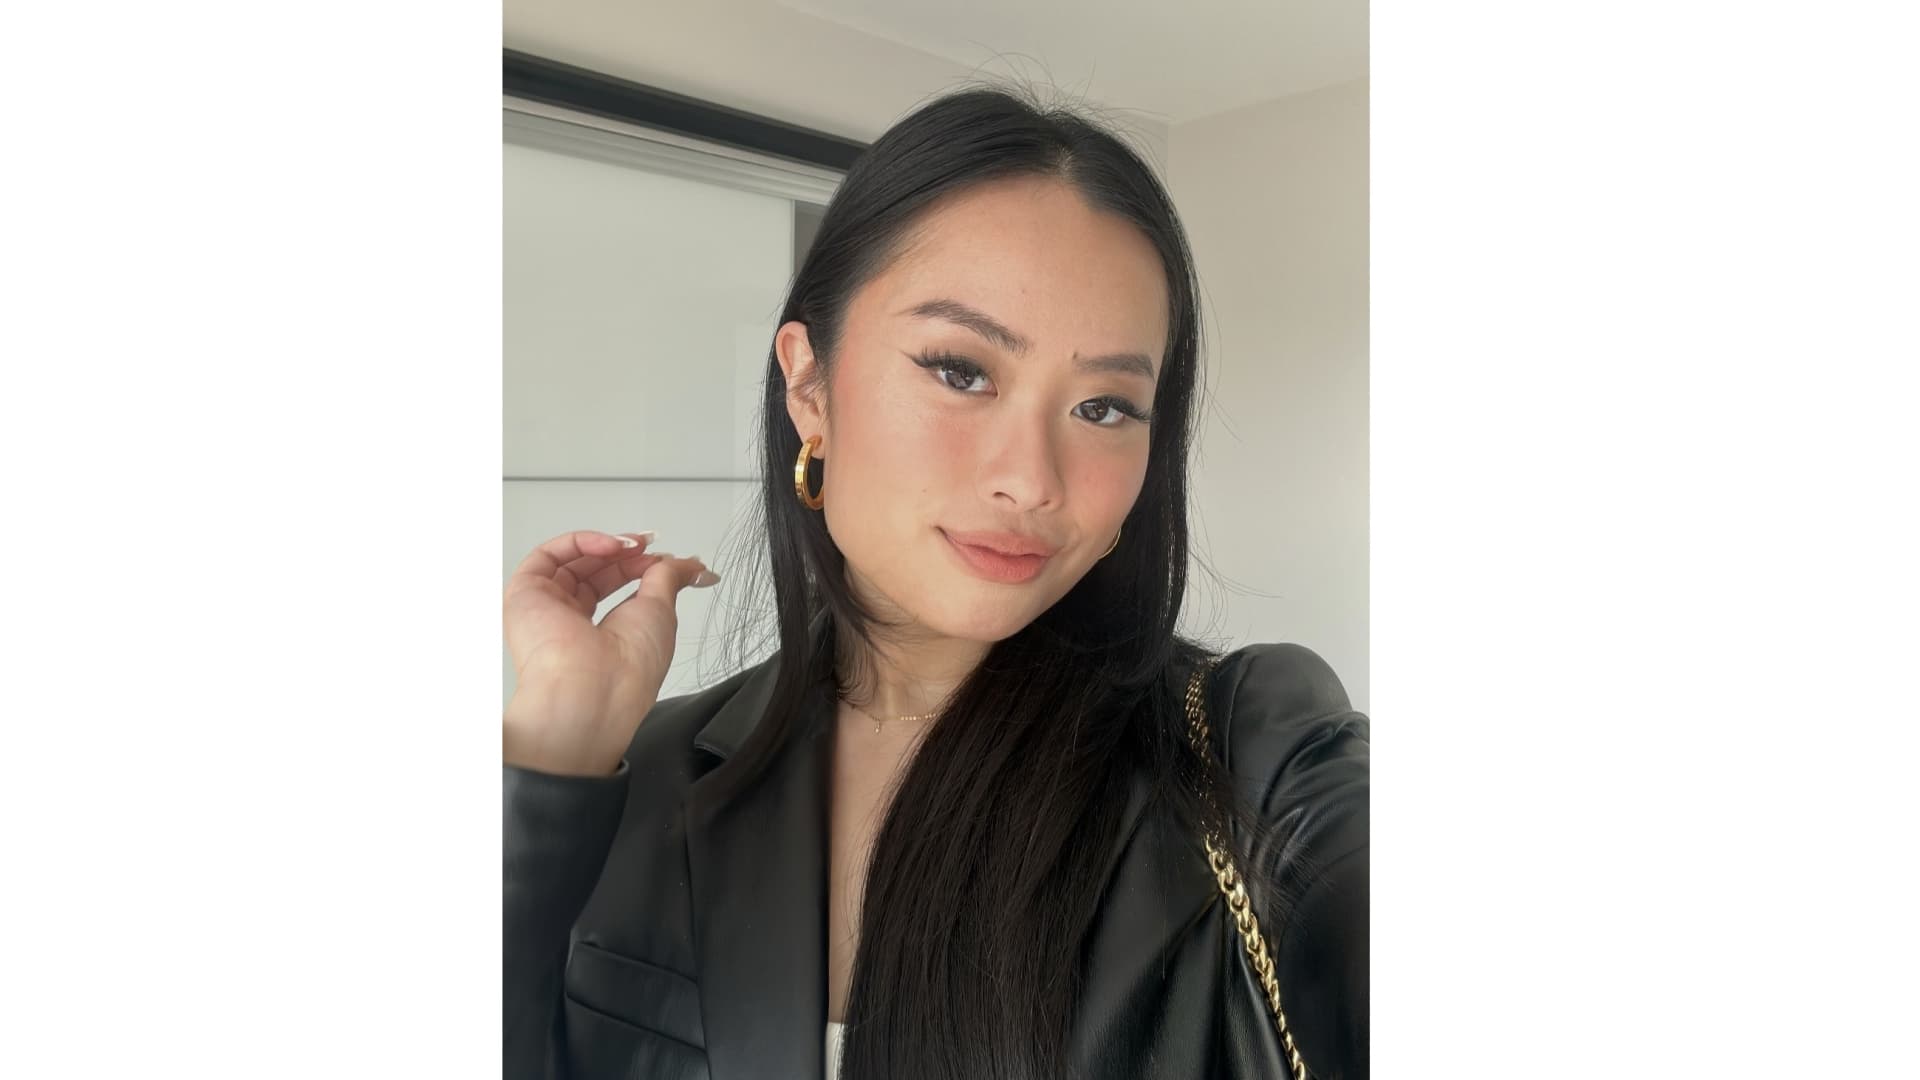 Calista Tee, 28, plans to use her post-layoff time to build her social media marketing brand on TikTok and beyond.